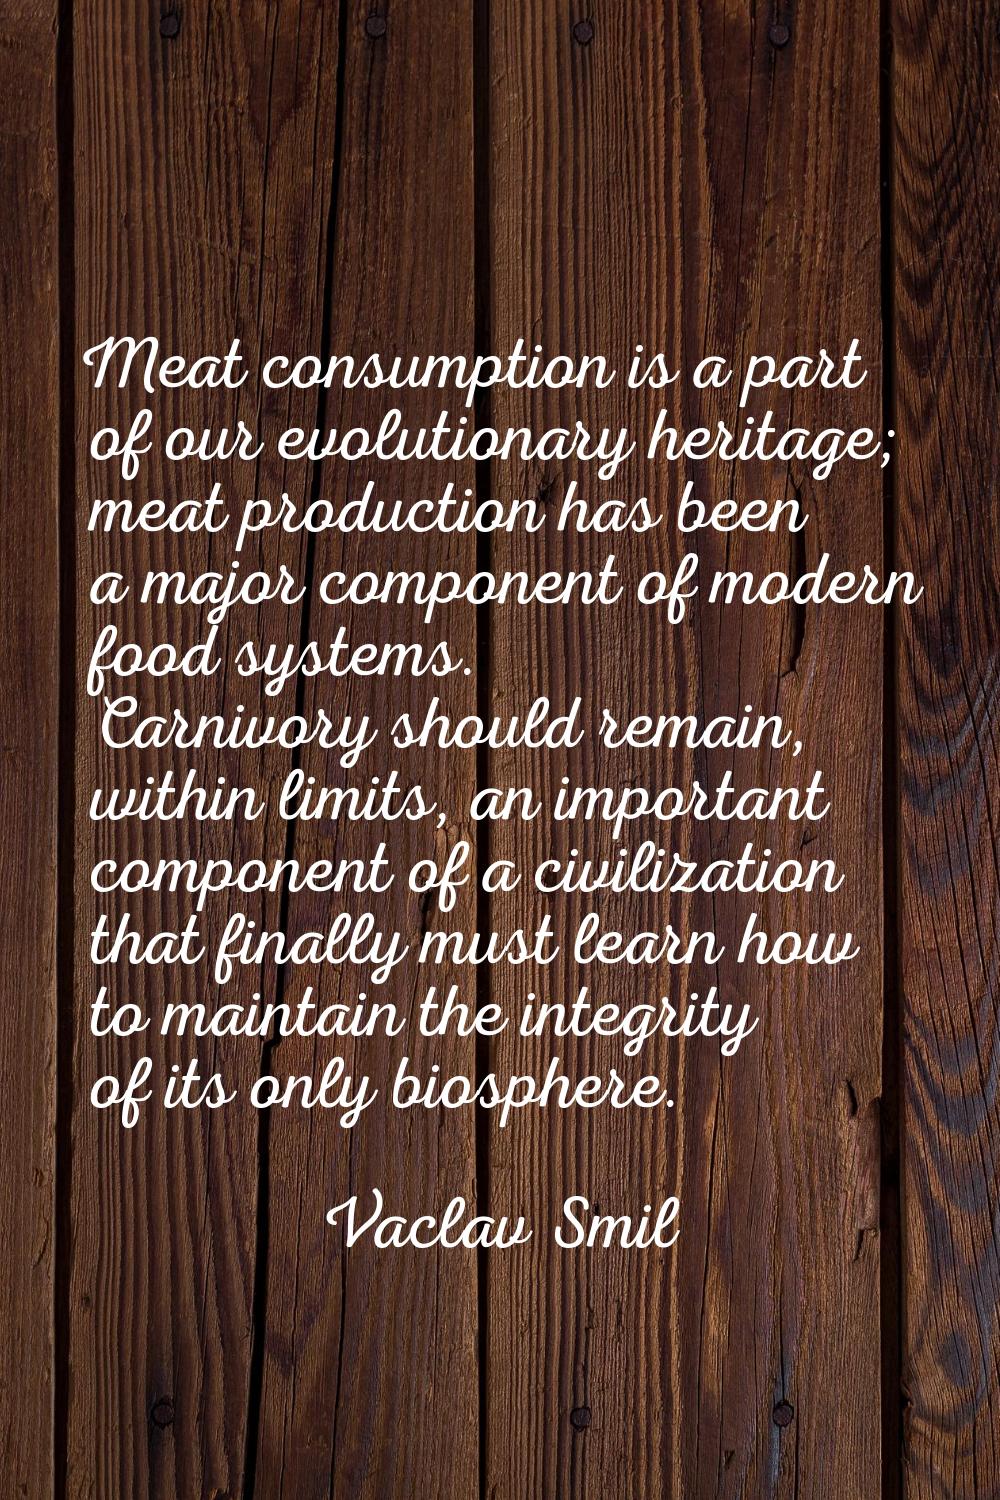 Meat consumption is a part of our evolutionary heritage; meat production has been a major component